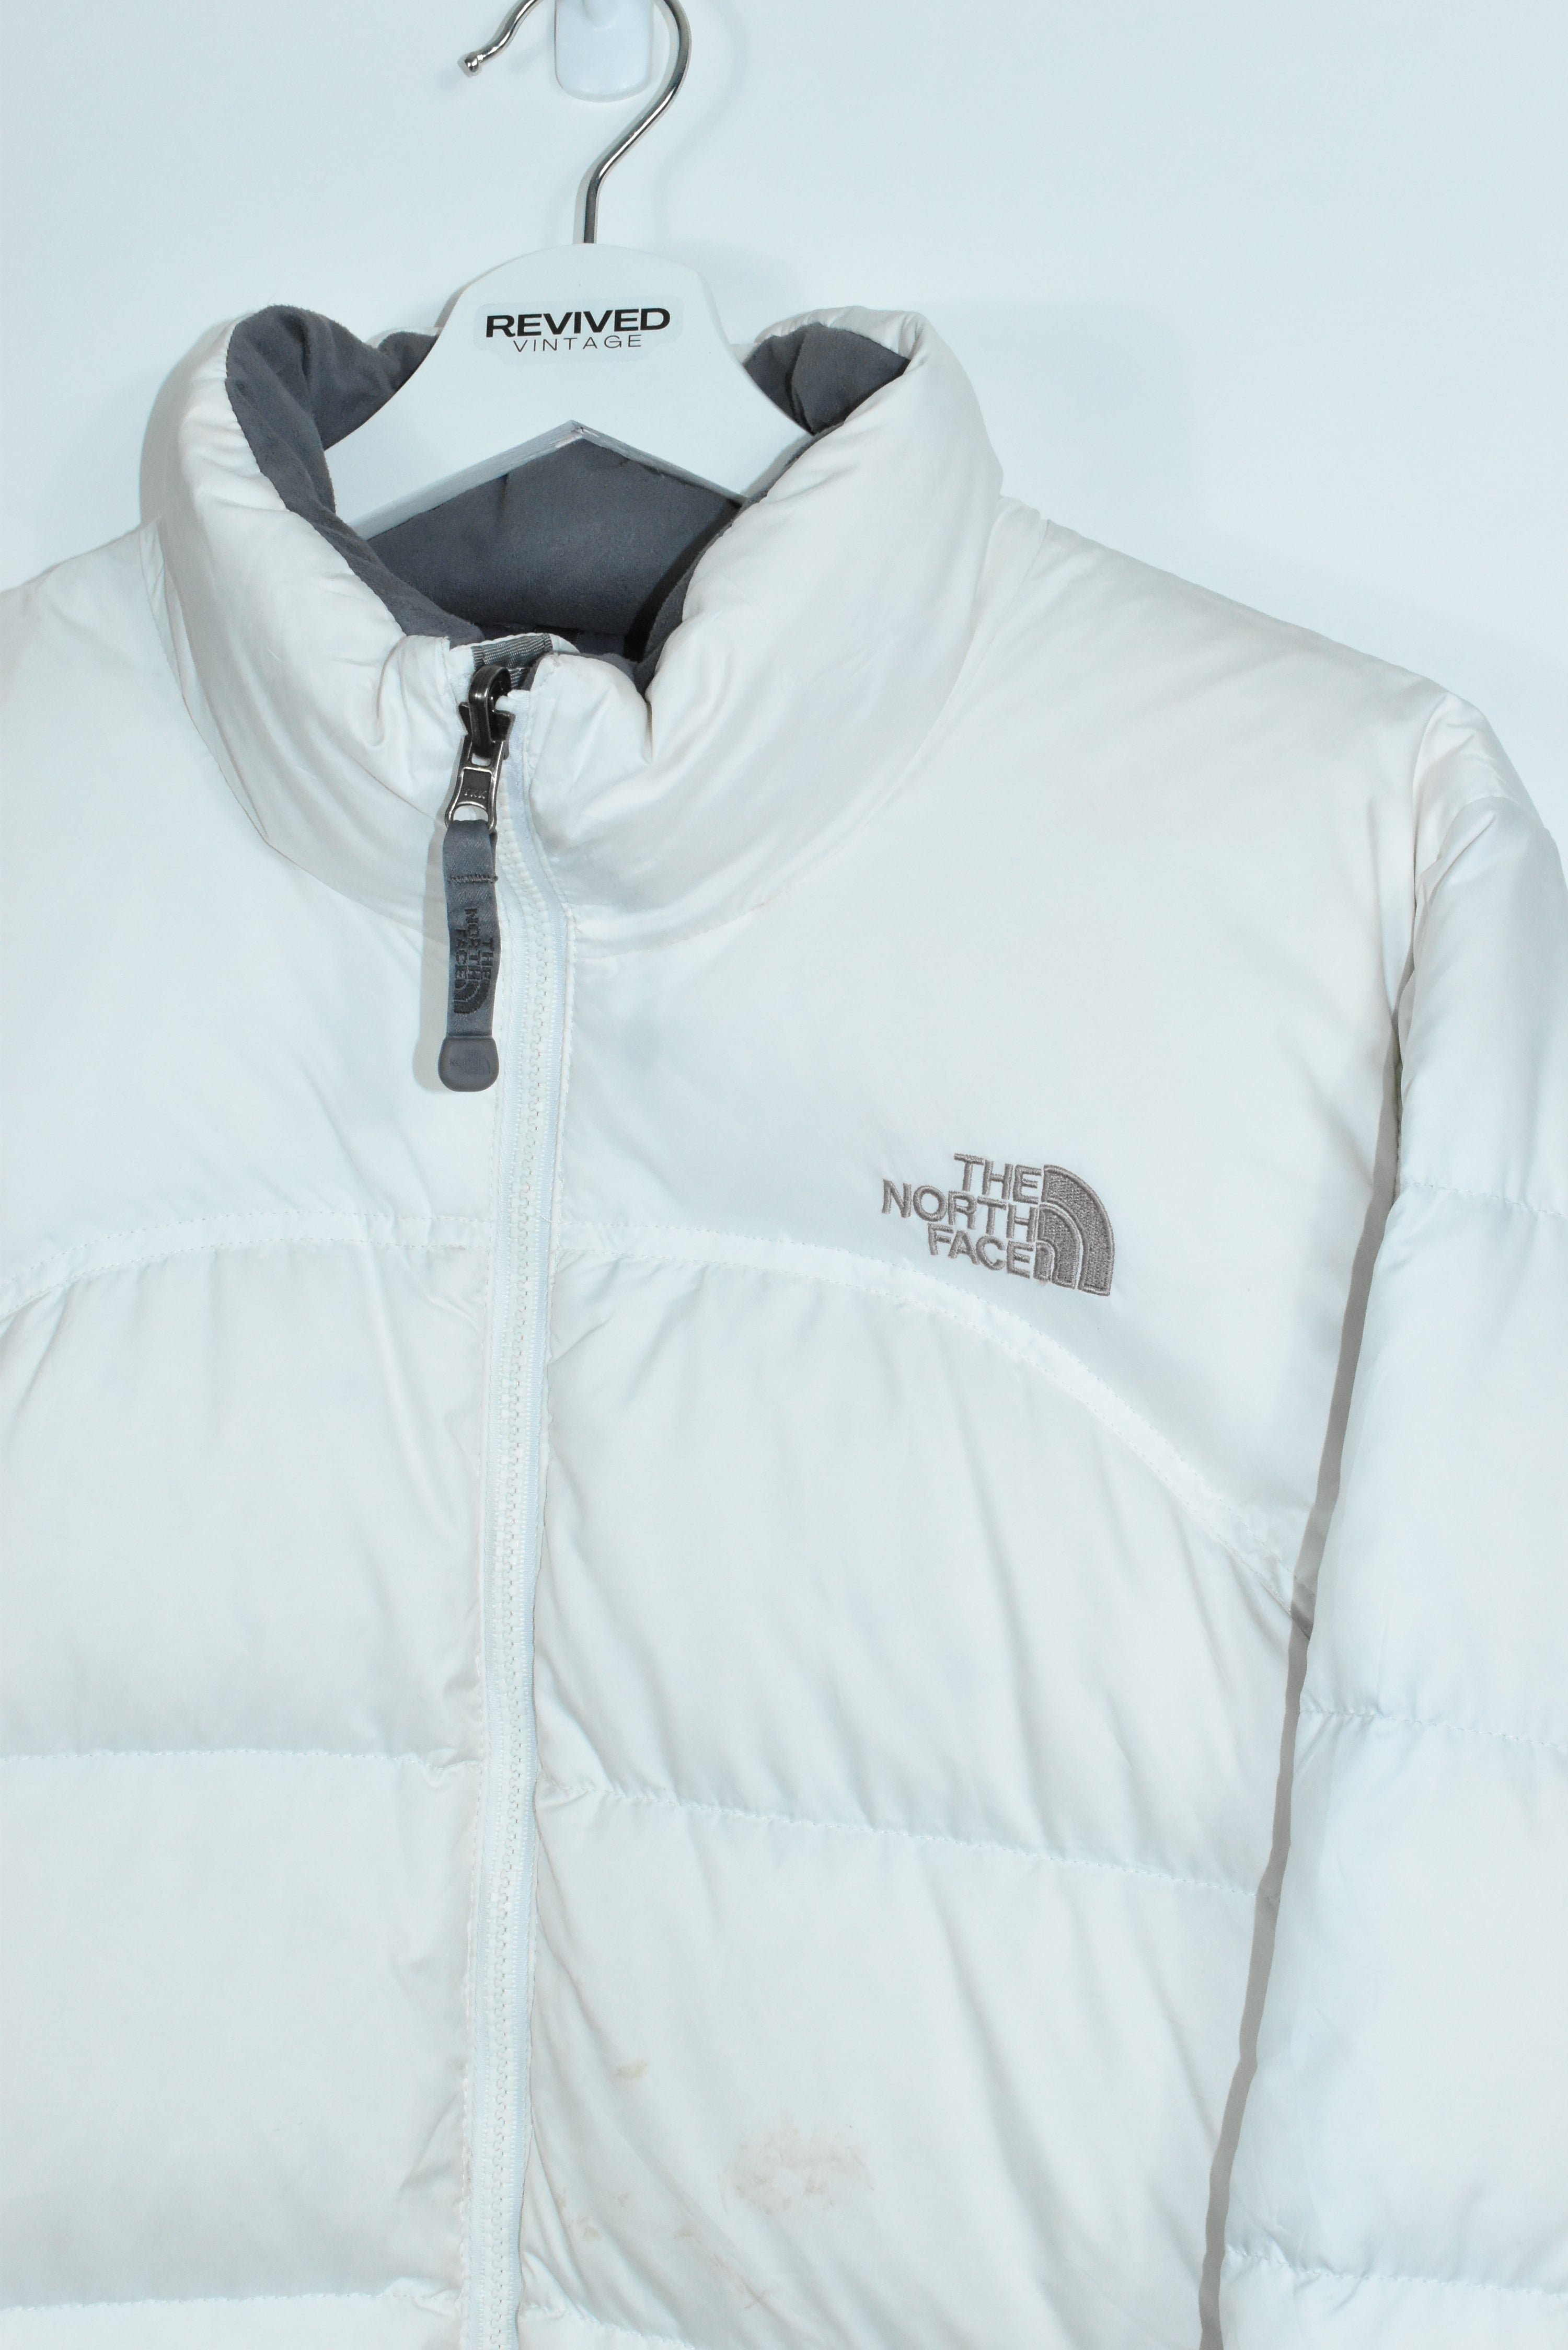 Vintage North Face 700 Puffer White Womens LARGE